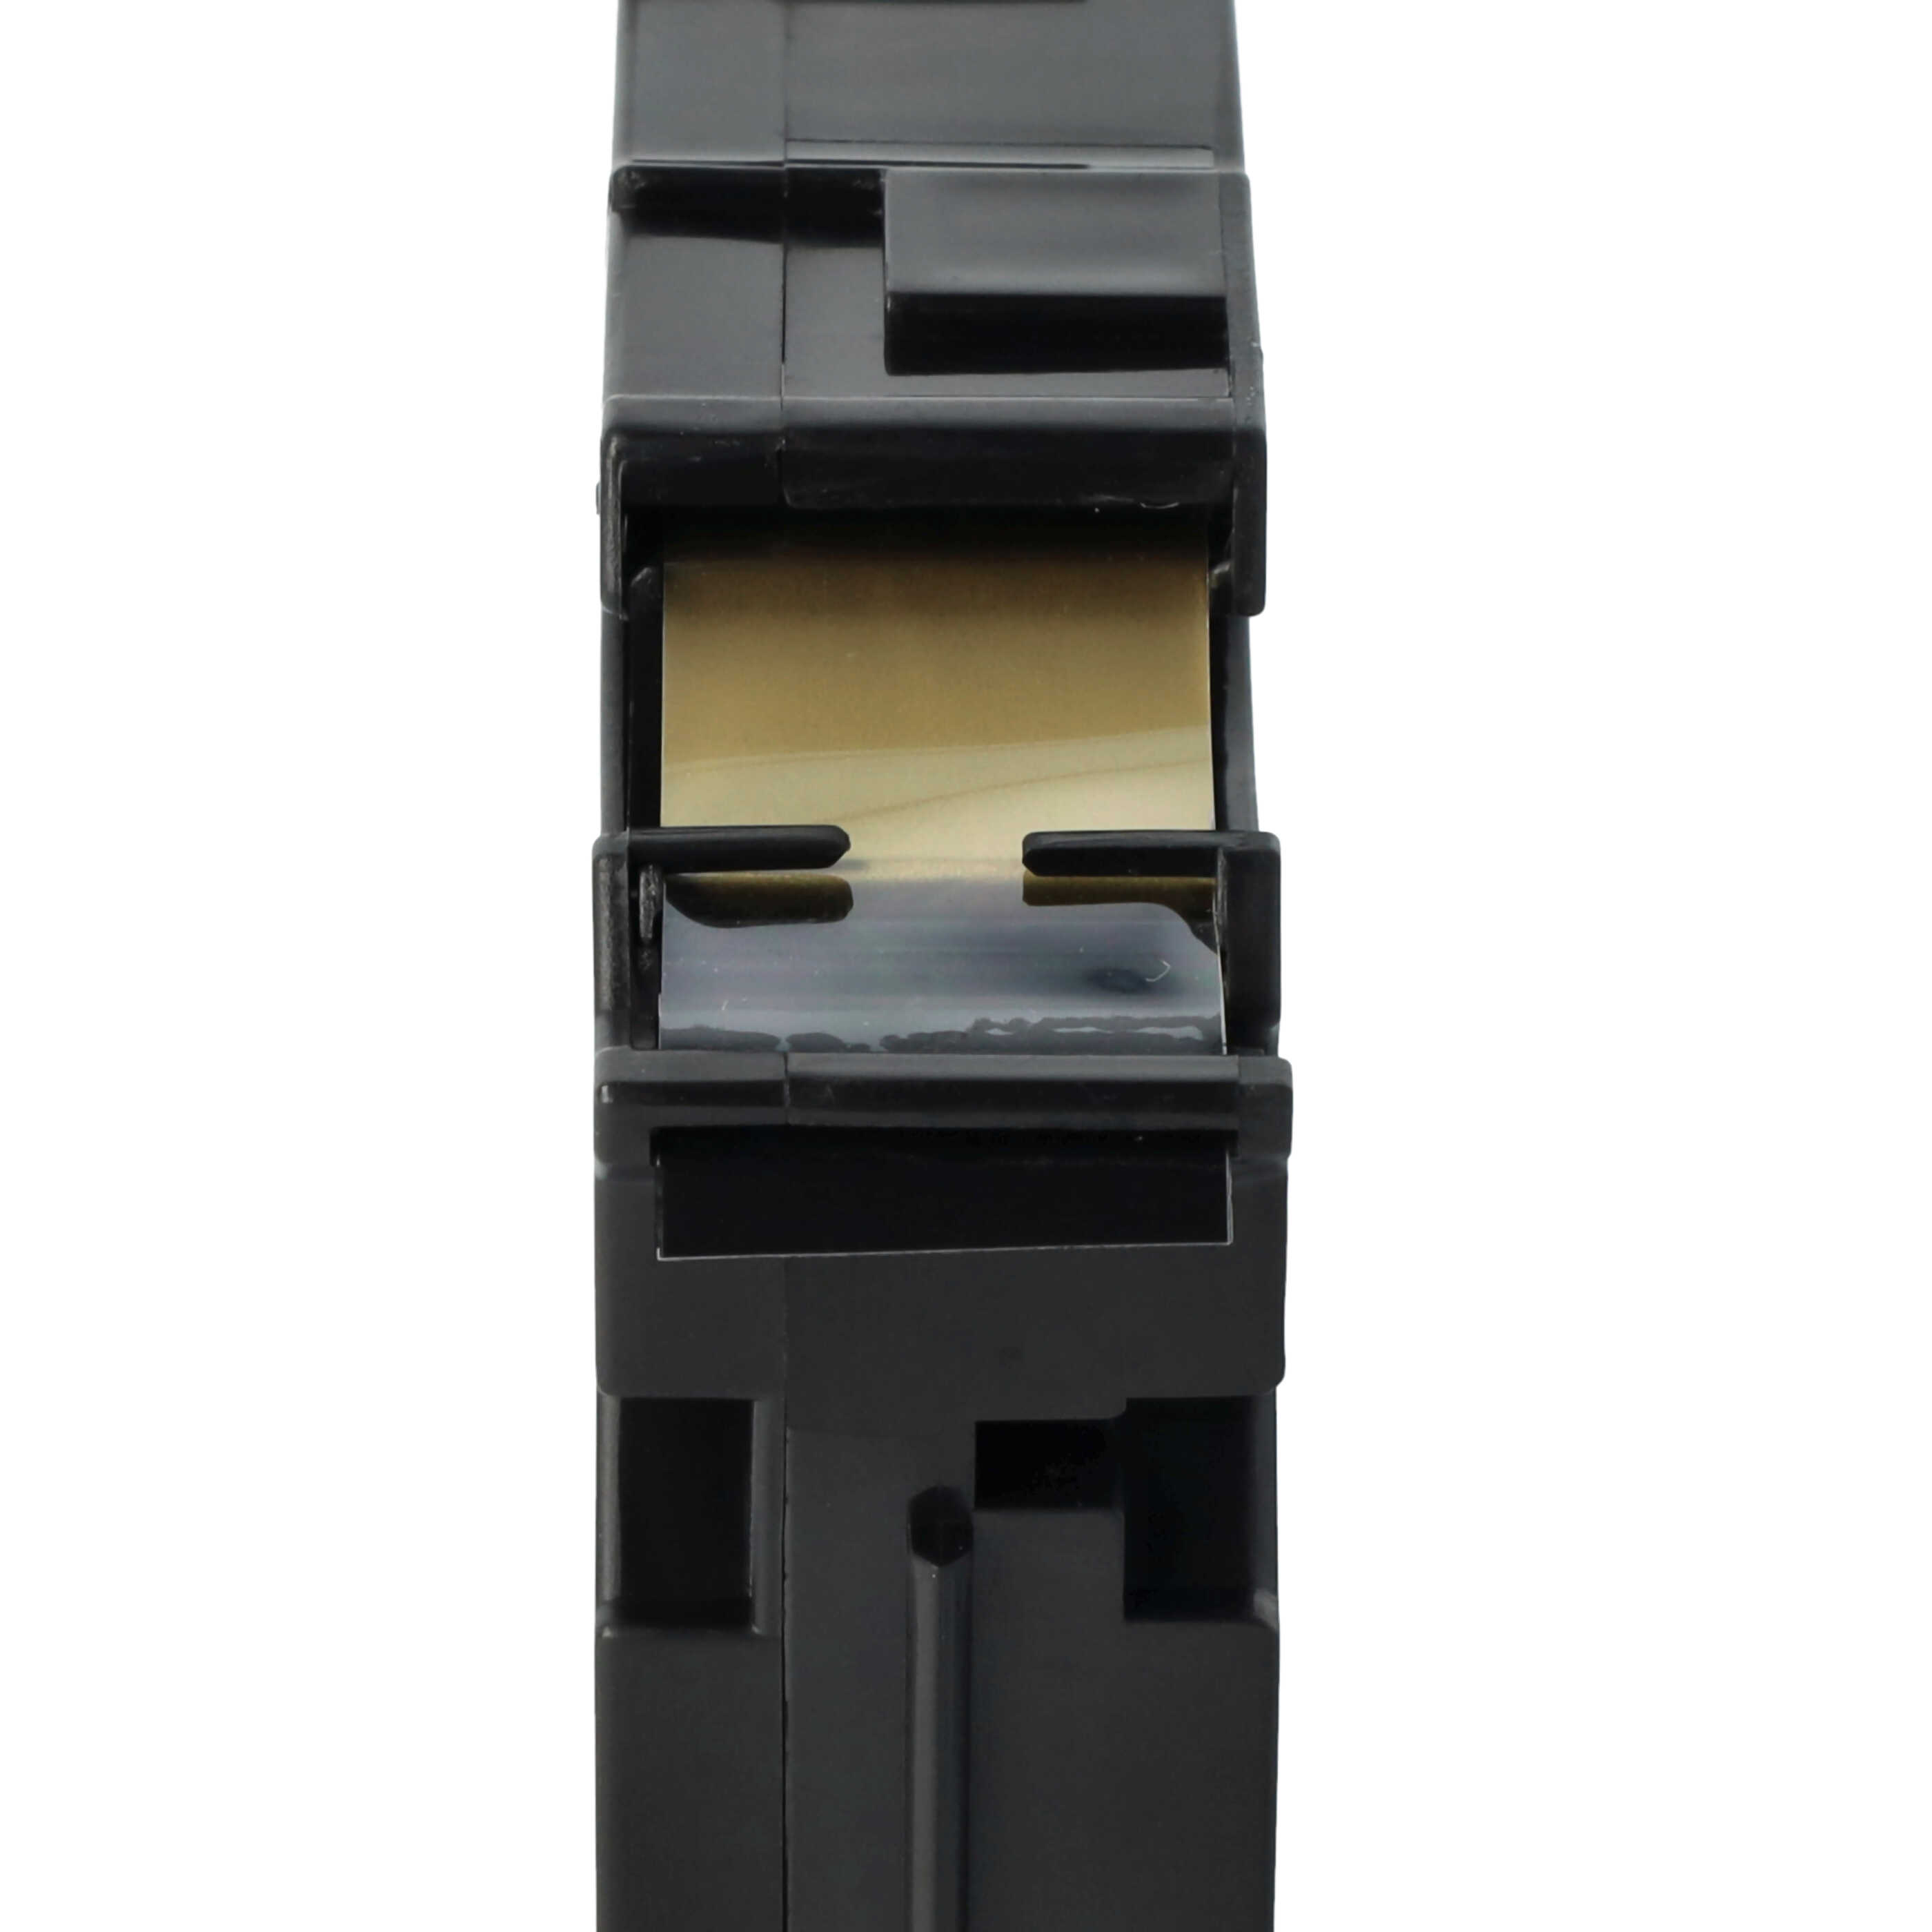 Label Tape as Replacement for Brother TZE-344, TZ-344 - 18 mm Gold to Black